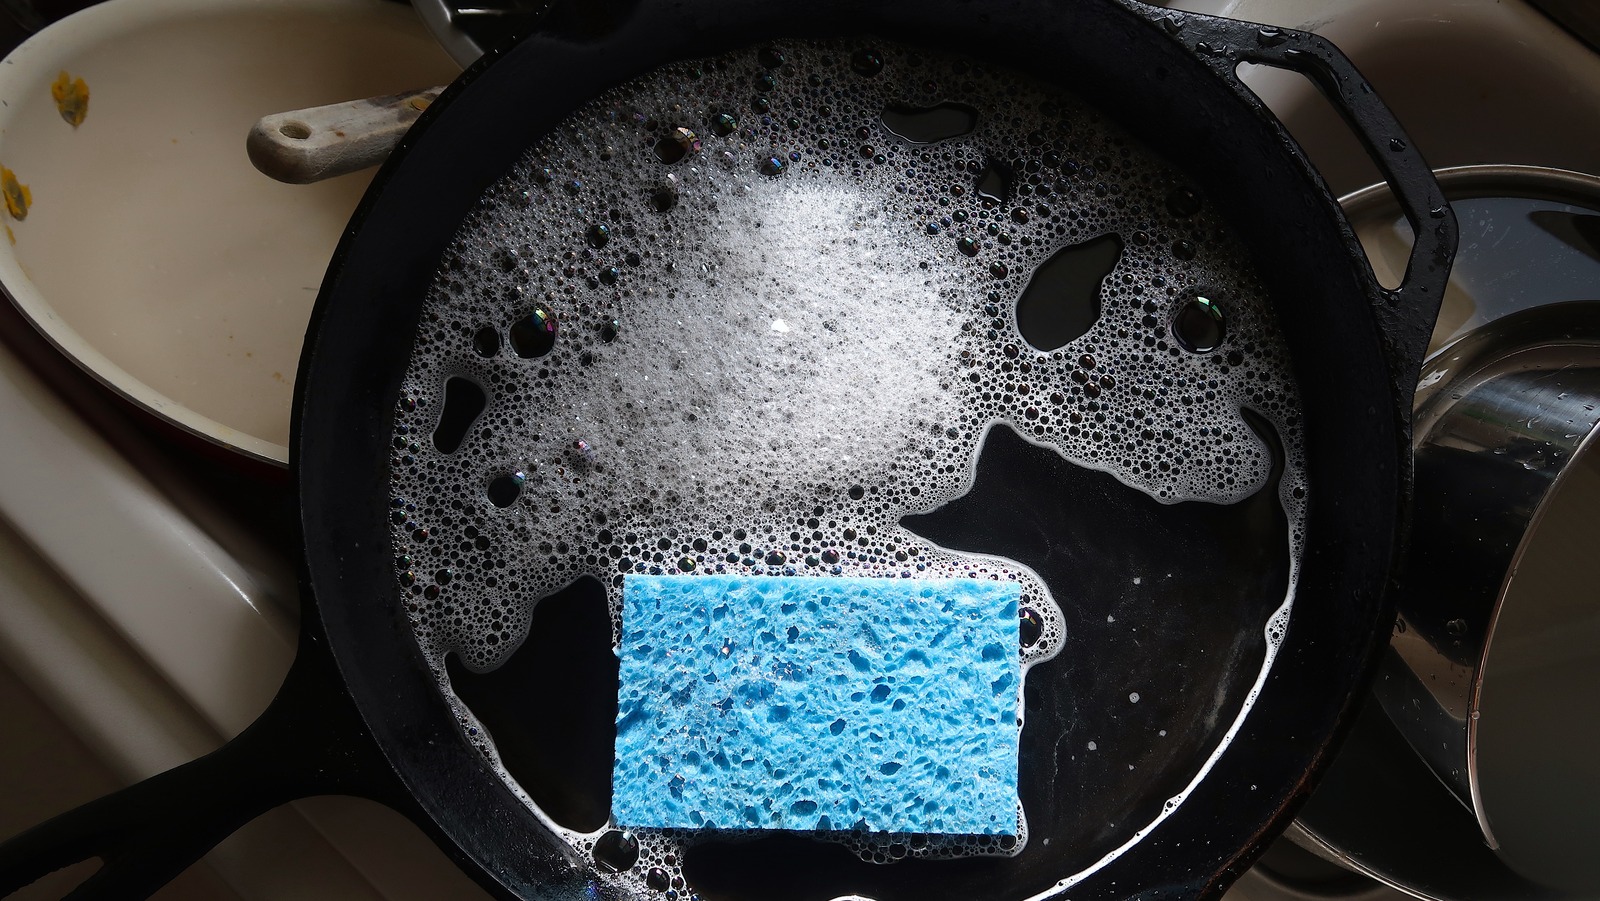 https://www.housedigest.com/img/gallery/is-it-a-good-idea-to-clean-your-cast-iron-pan-with-soap/l-intro-1700027651.jpg